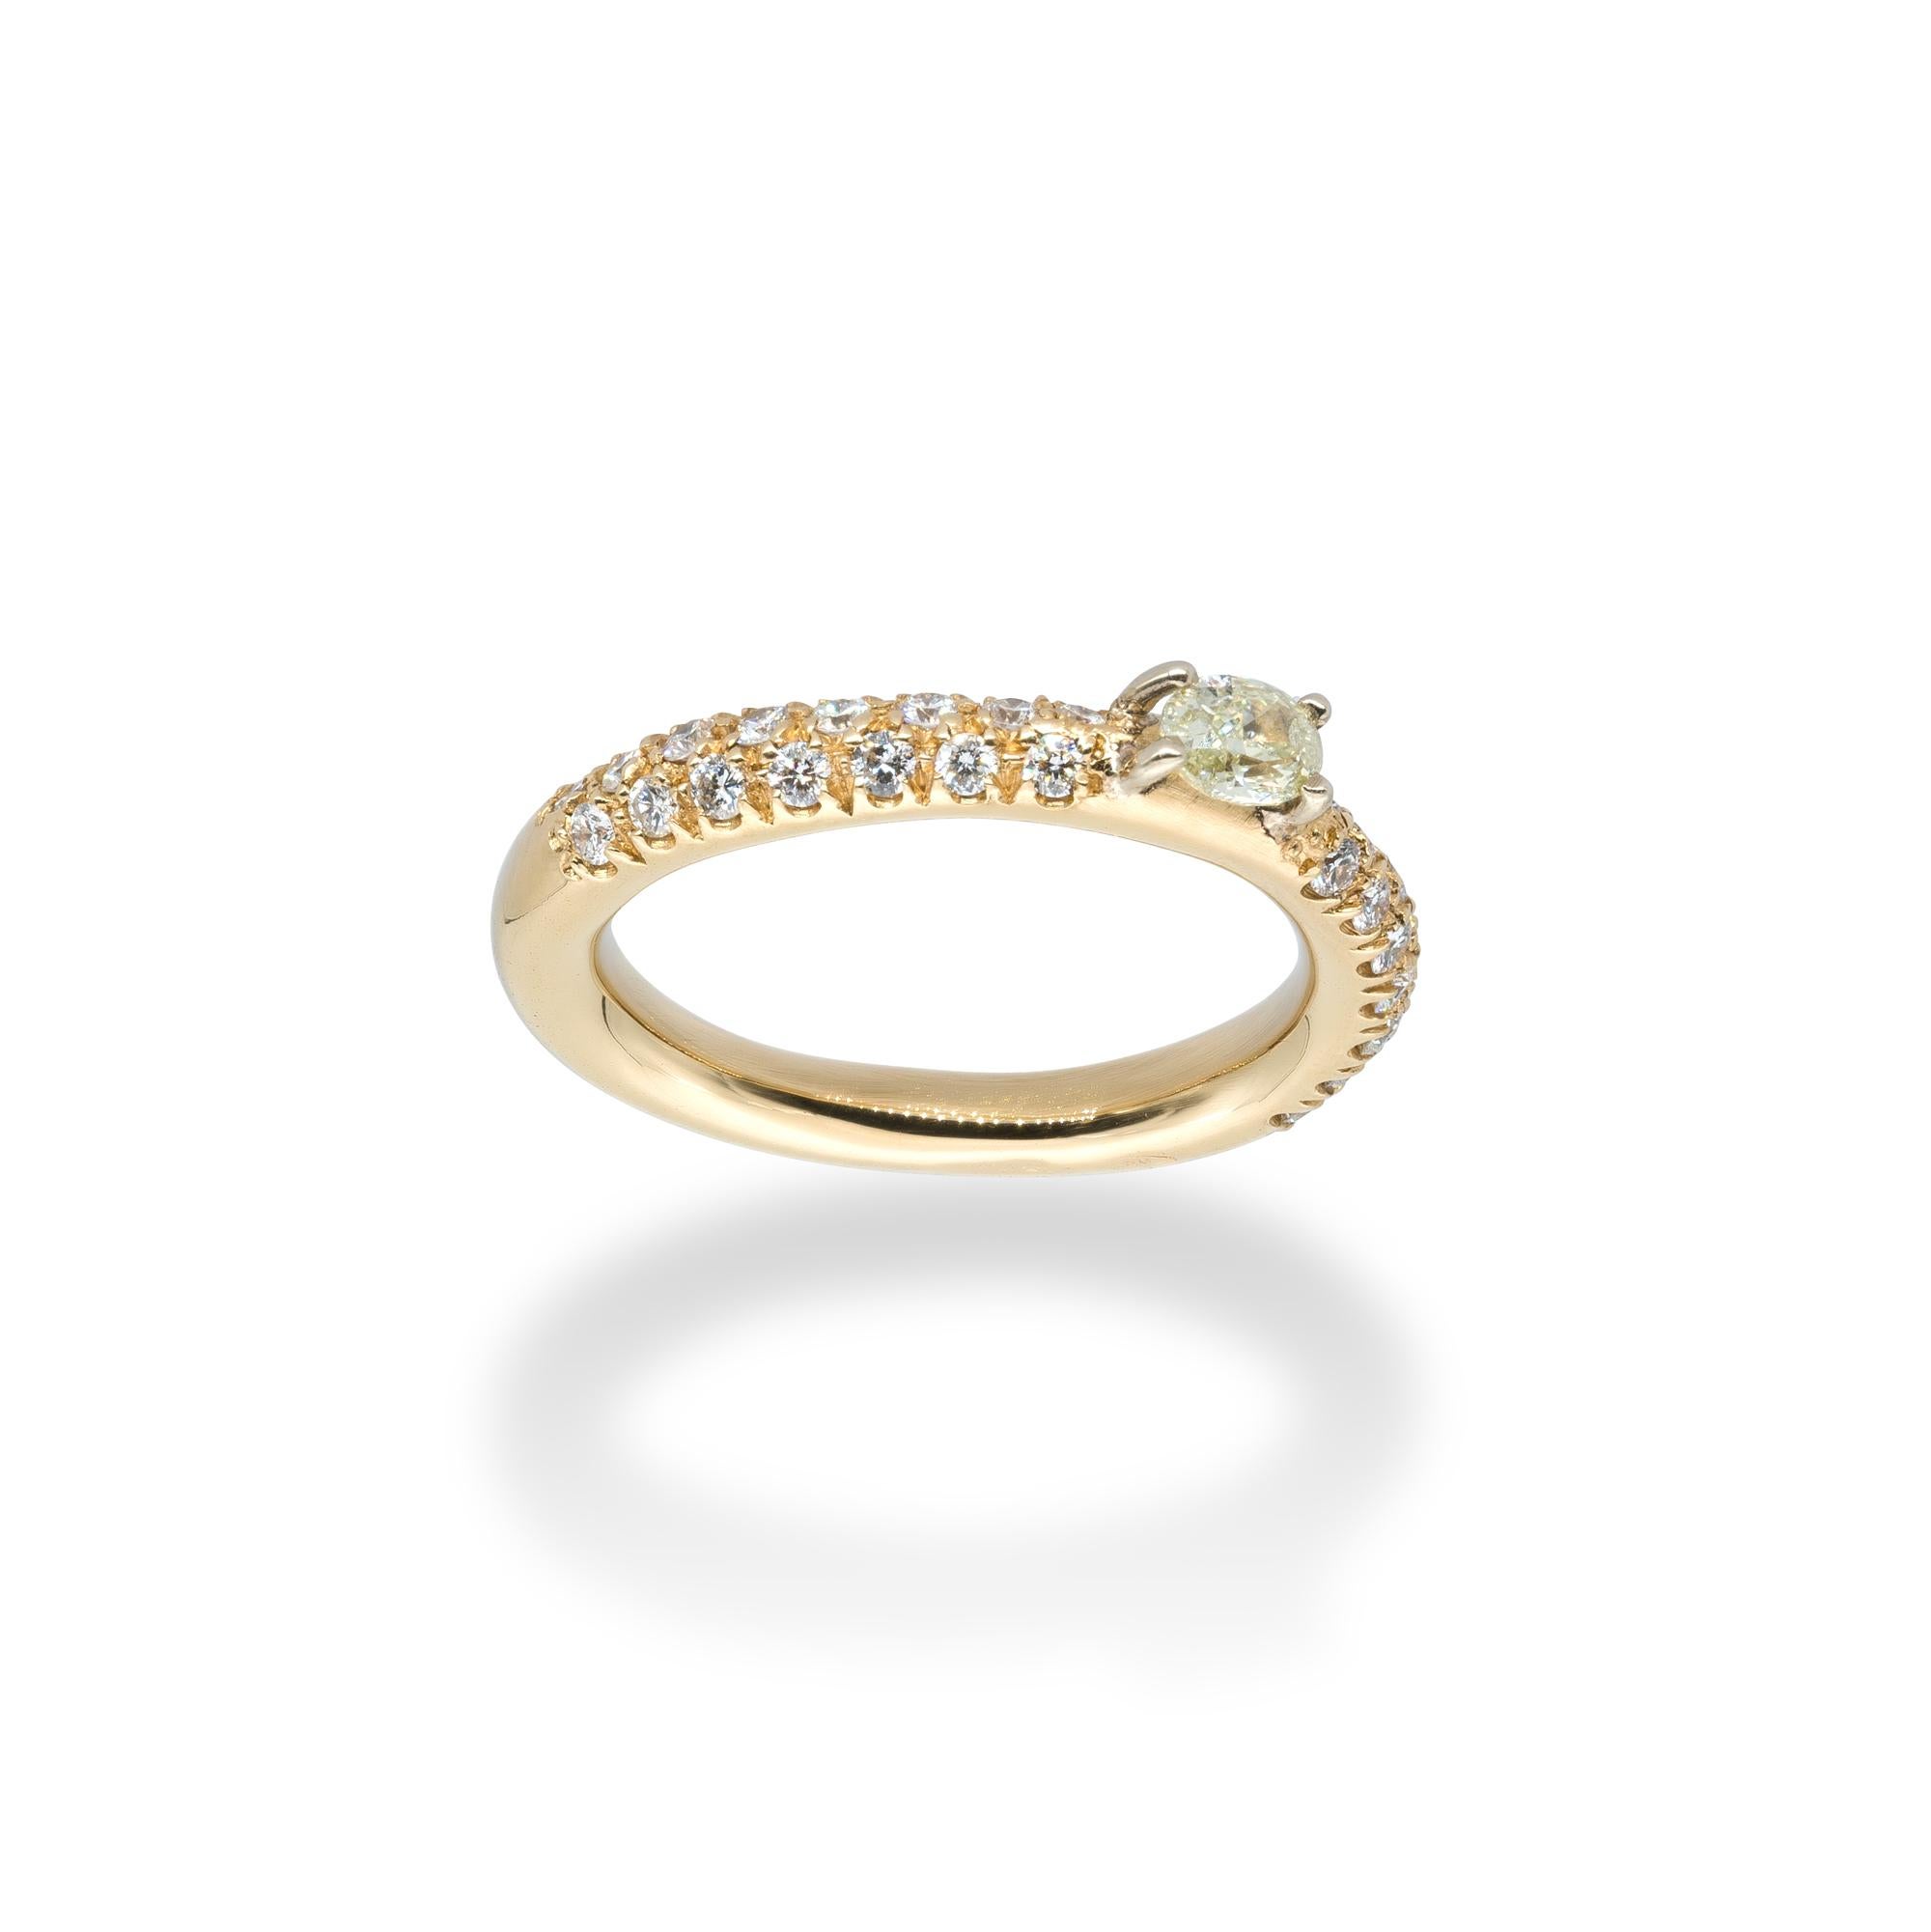 A Ring from d'Avossa Sunshine Collection in yellow 18 kt gold with a pavé of 0.55 cts of white diamonds and a central fancy natural oval shape diamond of 0.34 cts
This Ring has been designed to be worn alone, 
maybe as an engagement ring, 
or